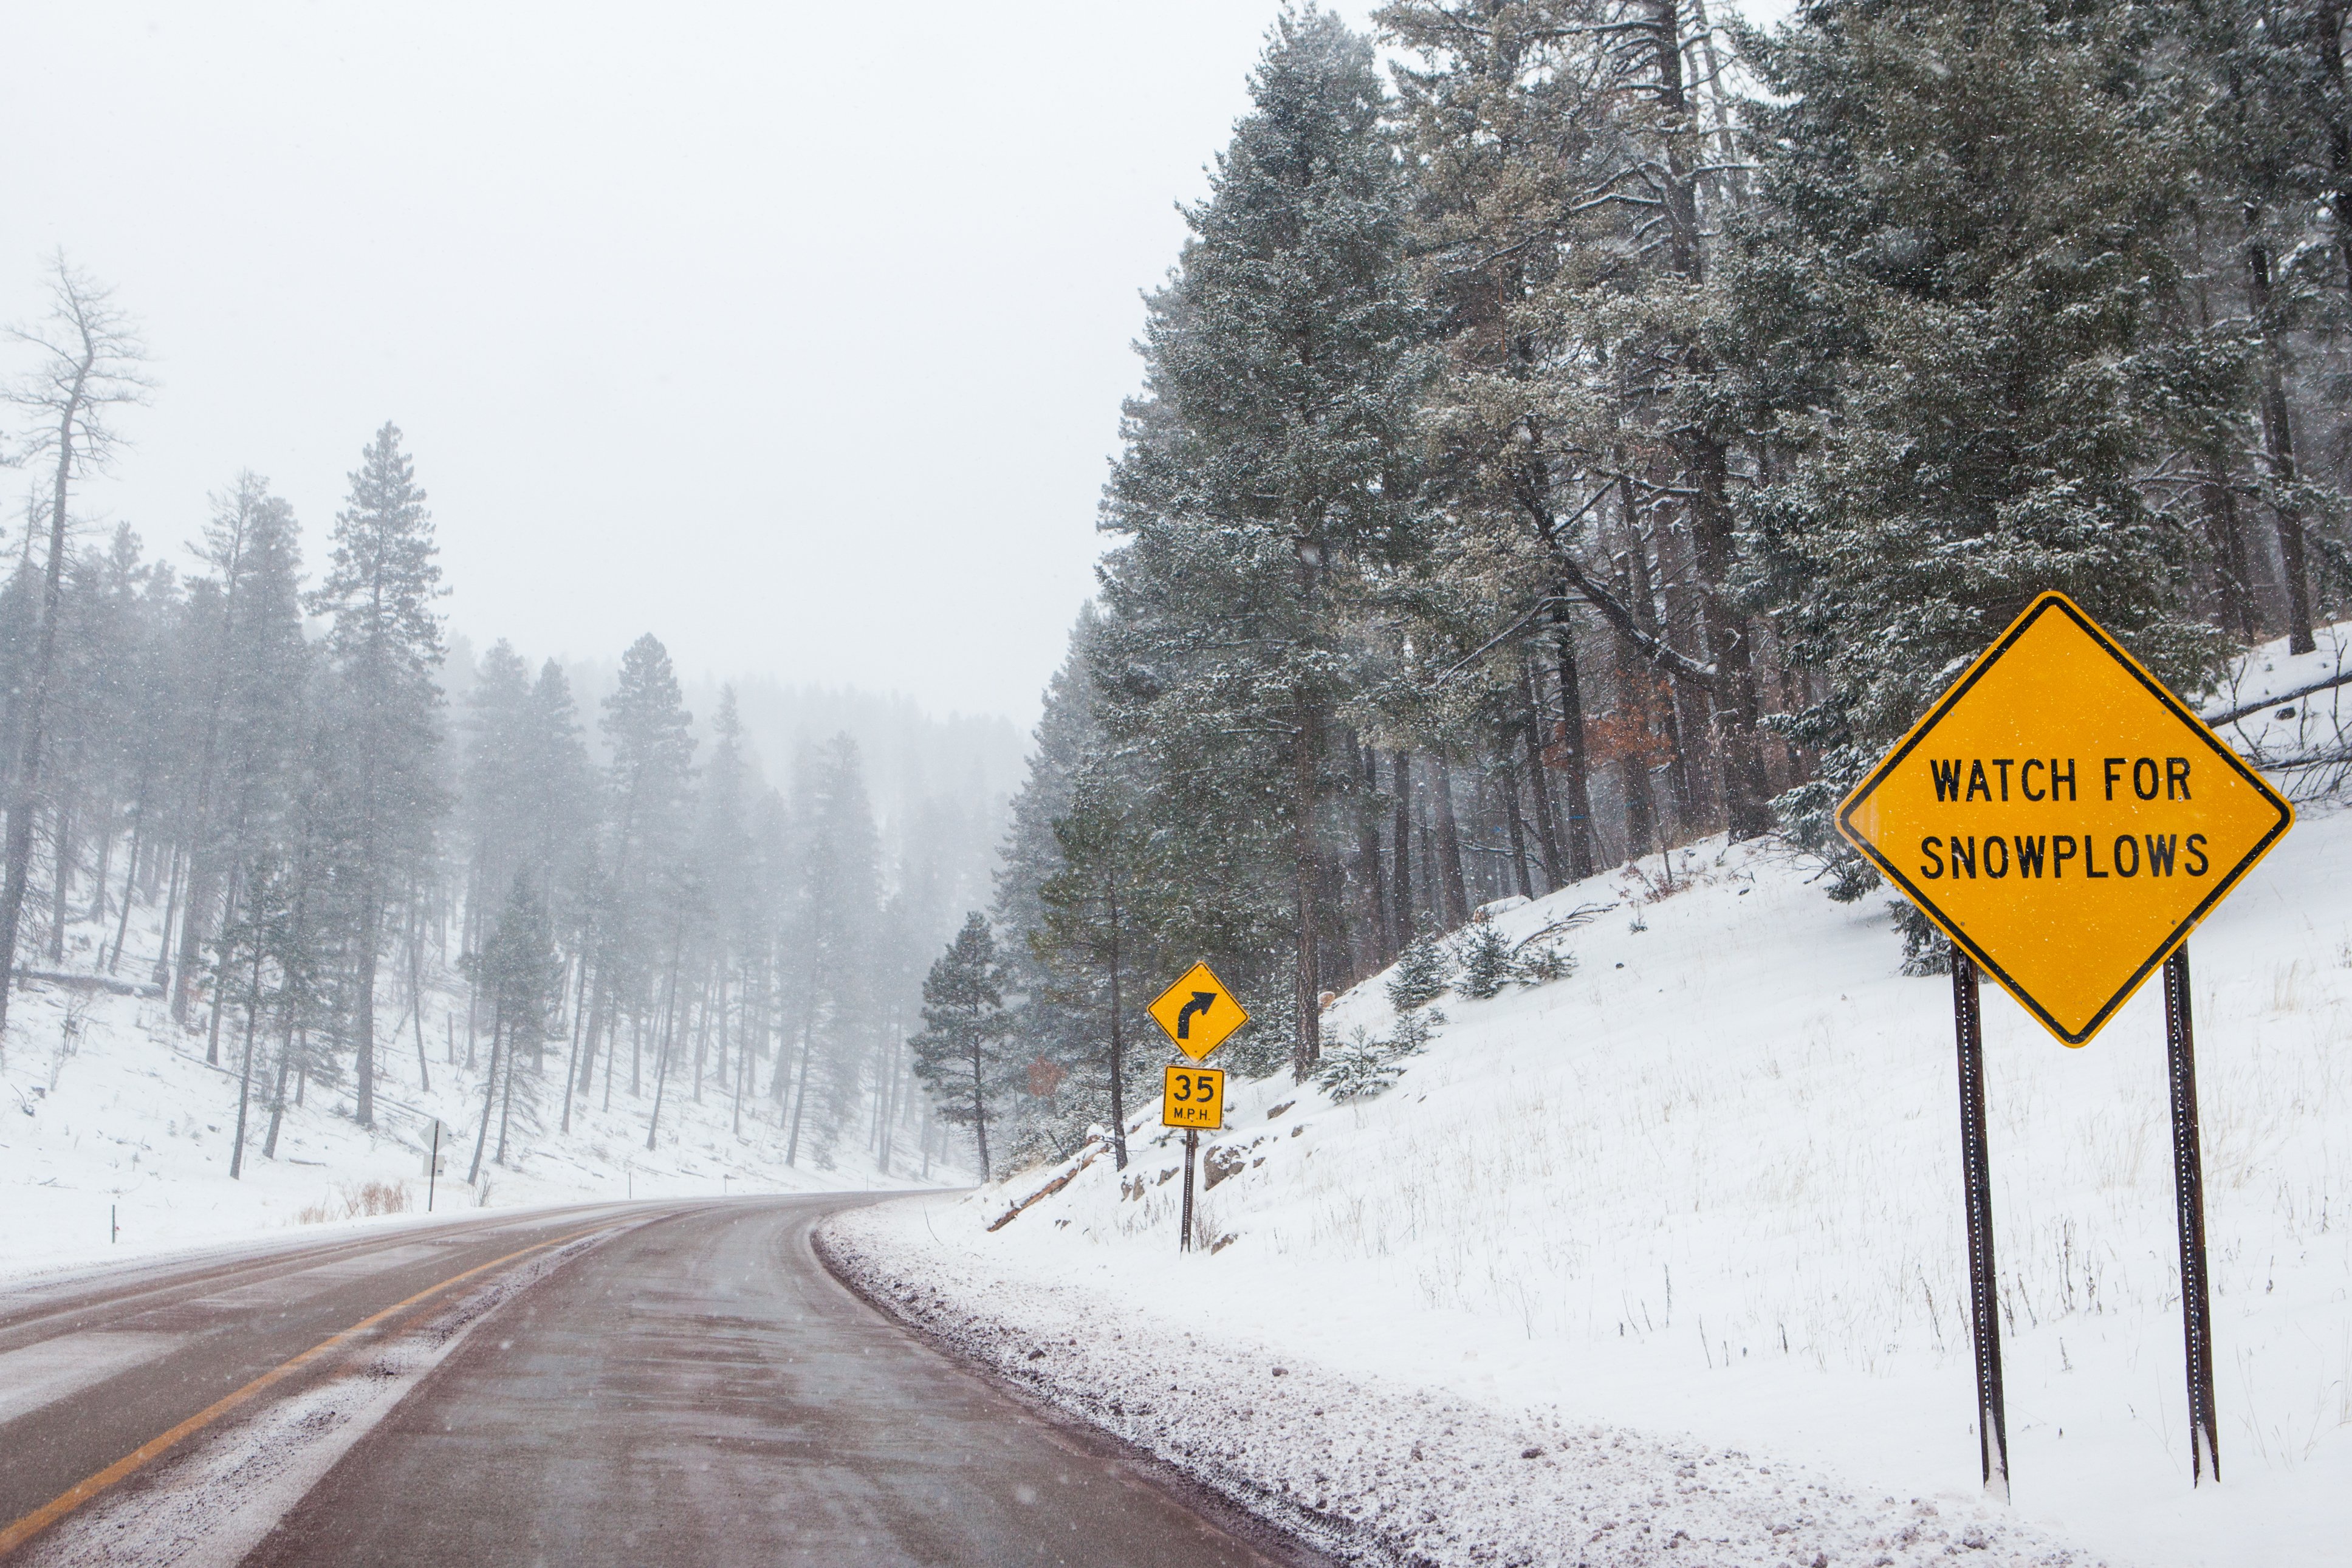 Pictured - A snowy mountain road with warning signs in Cloudcroft, New Mexico | Photo: Shutterstock